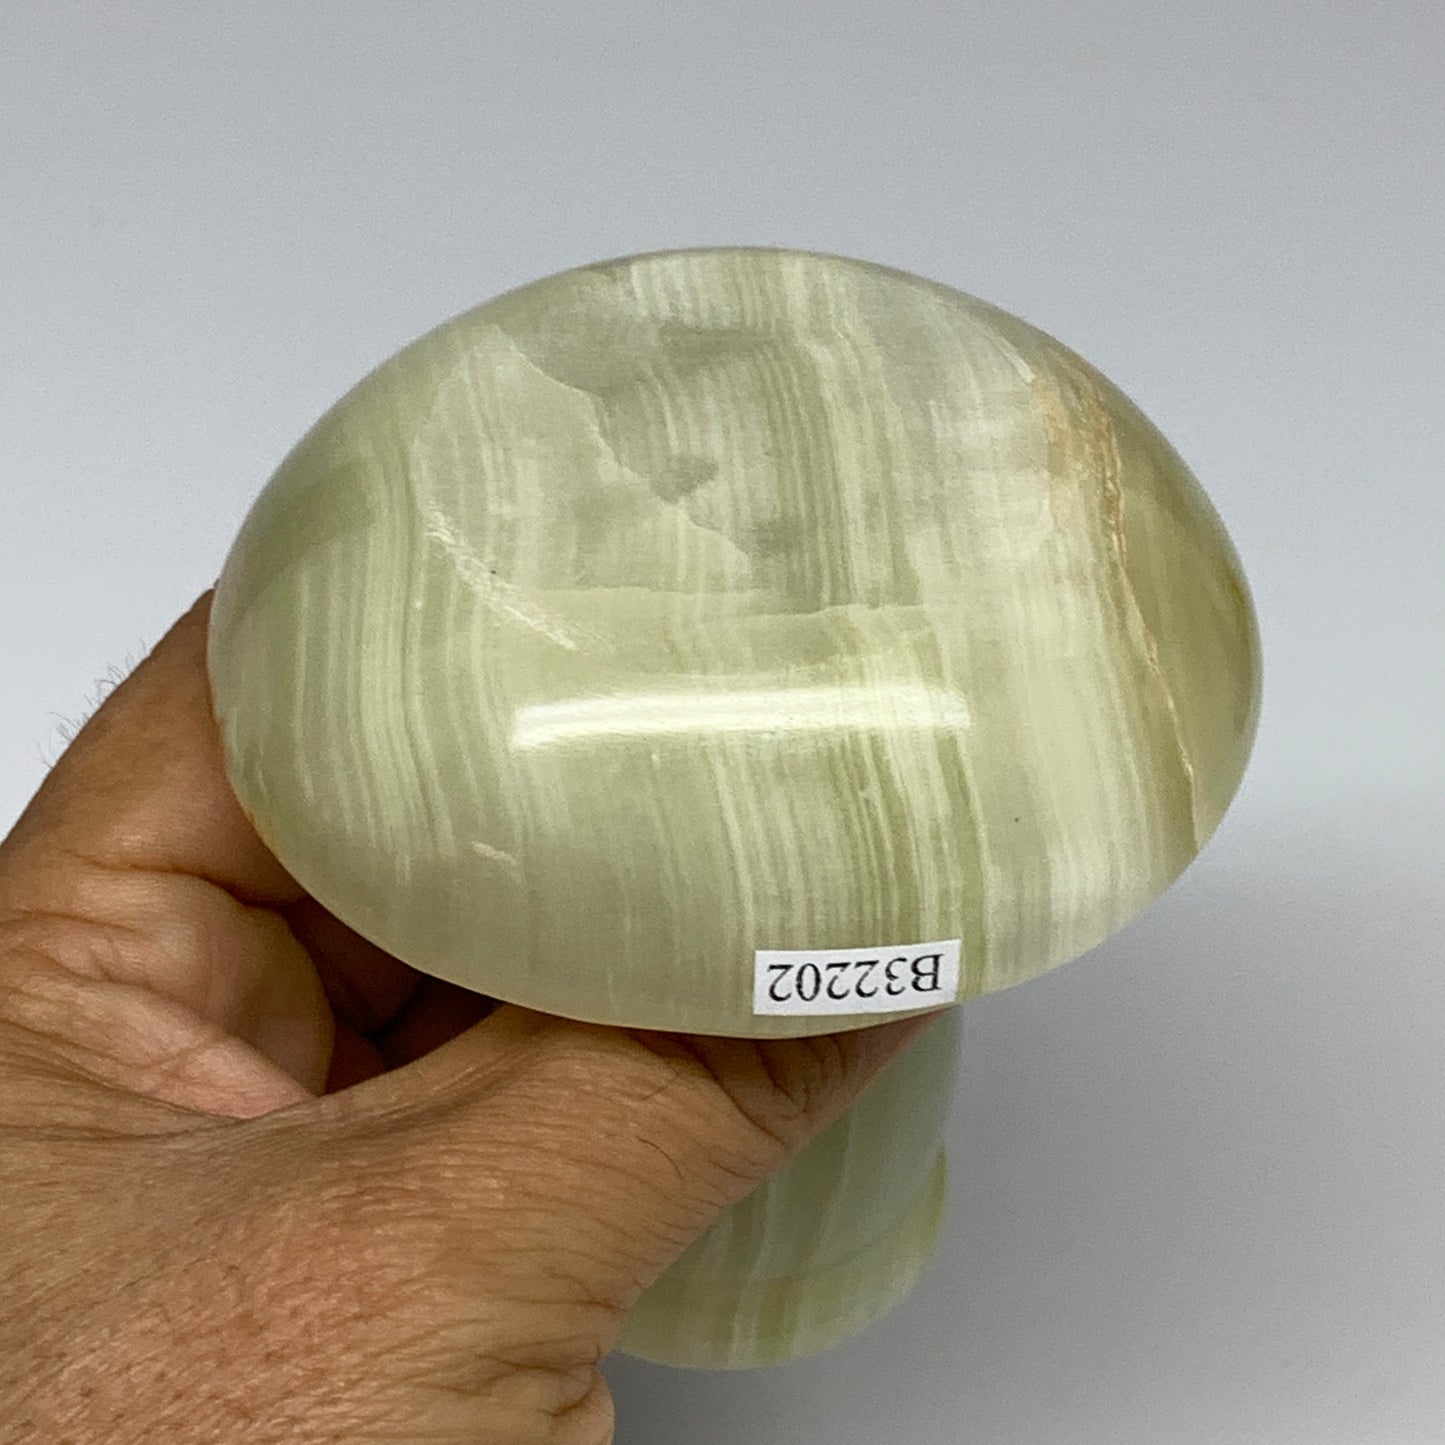 270g, 3.2"x1.5"x3", Natural Green Onyx Candle Holder Gemstone Hand Carved, B3220